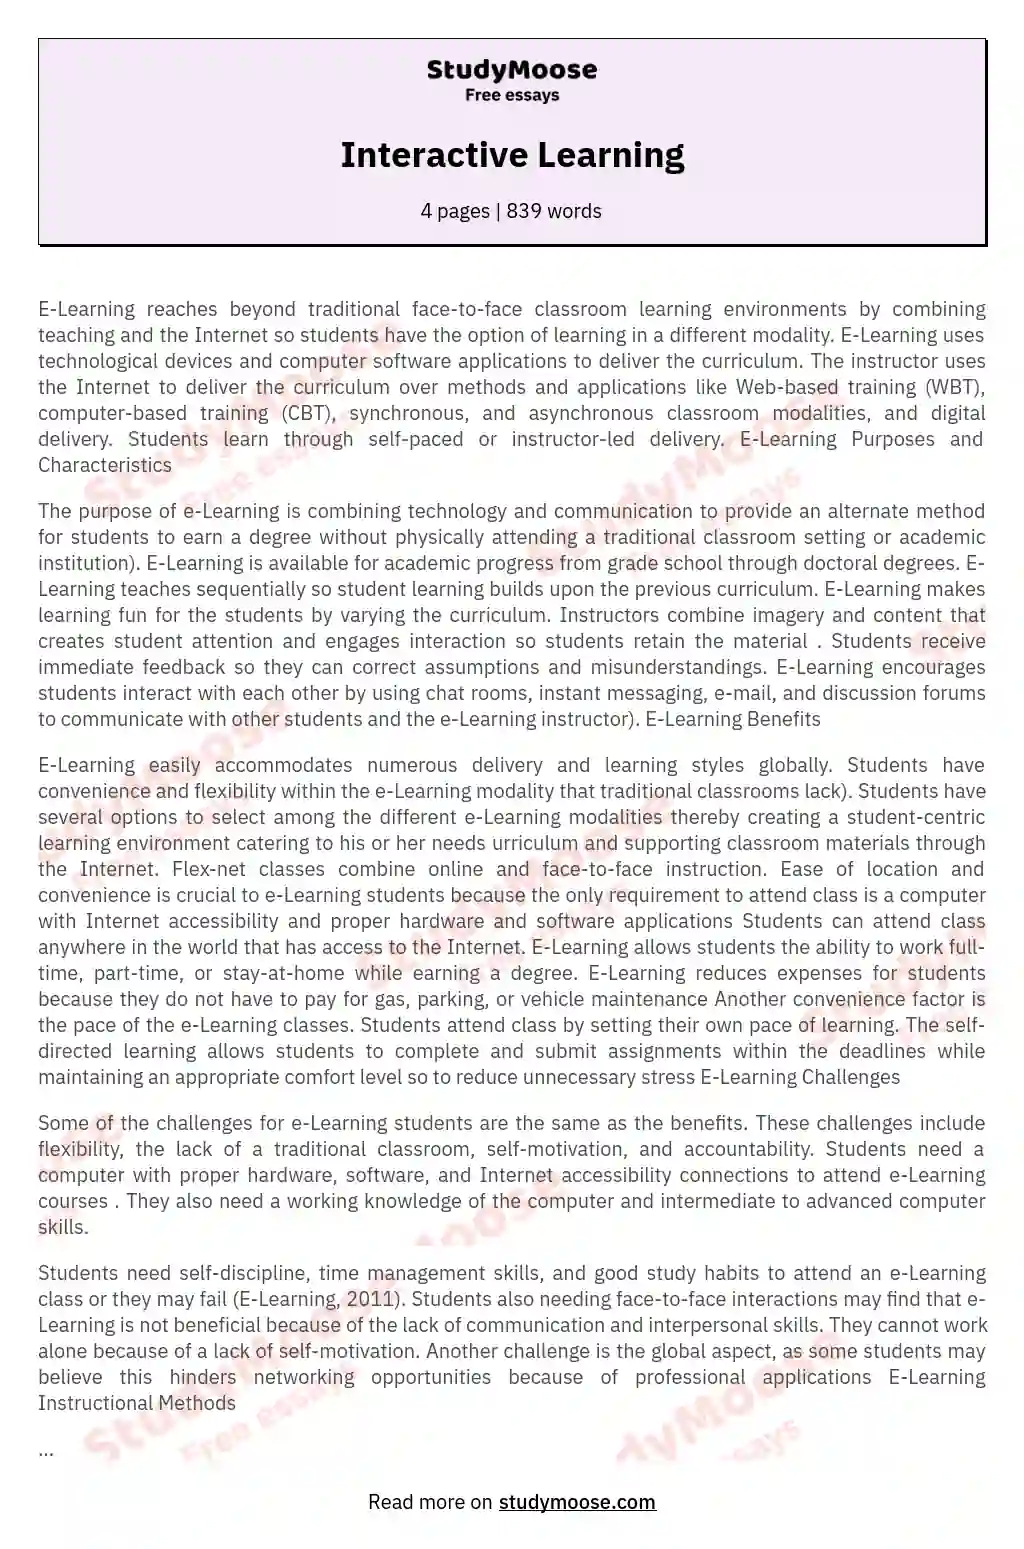 Interactive Learning essay